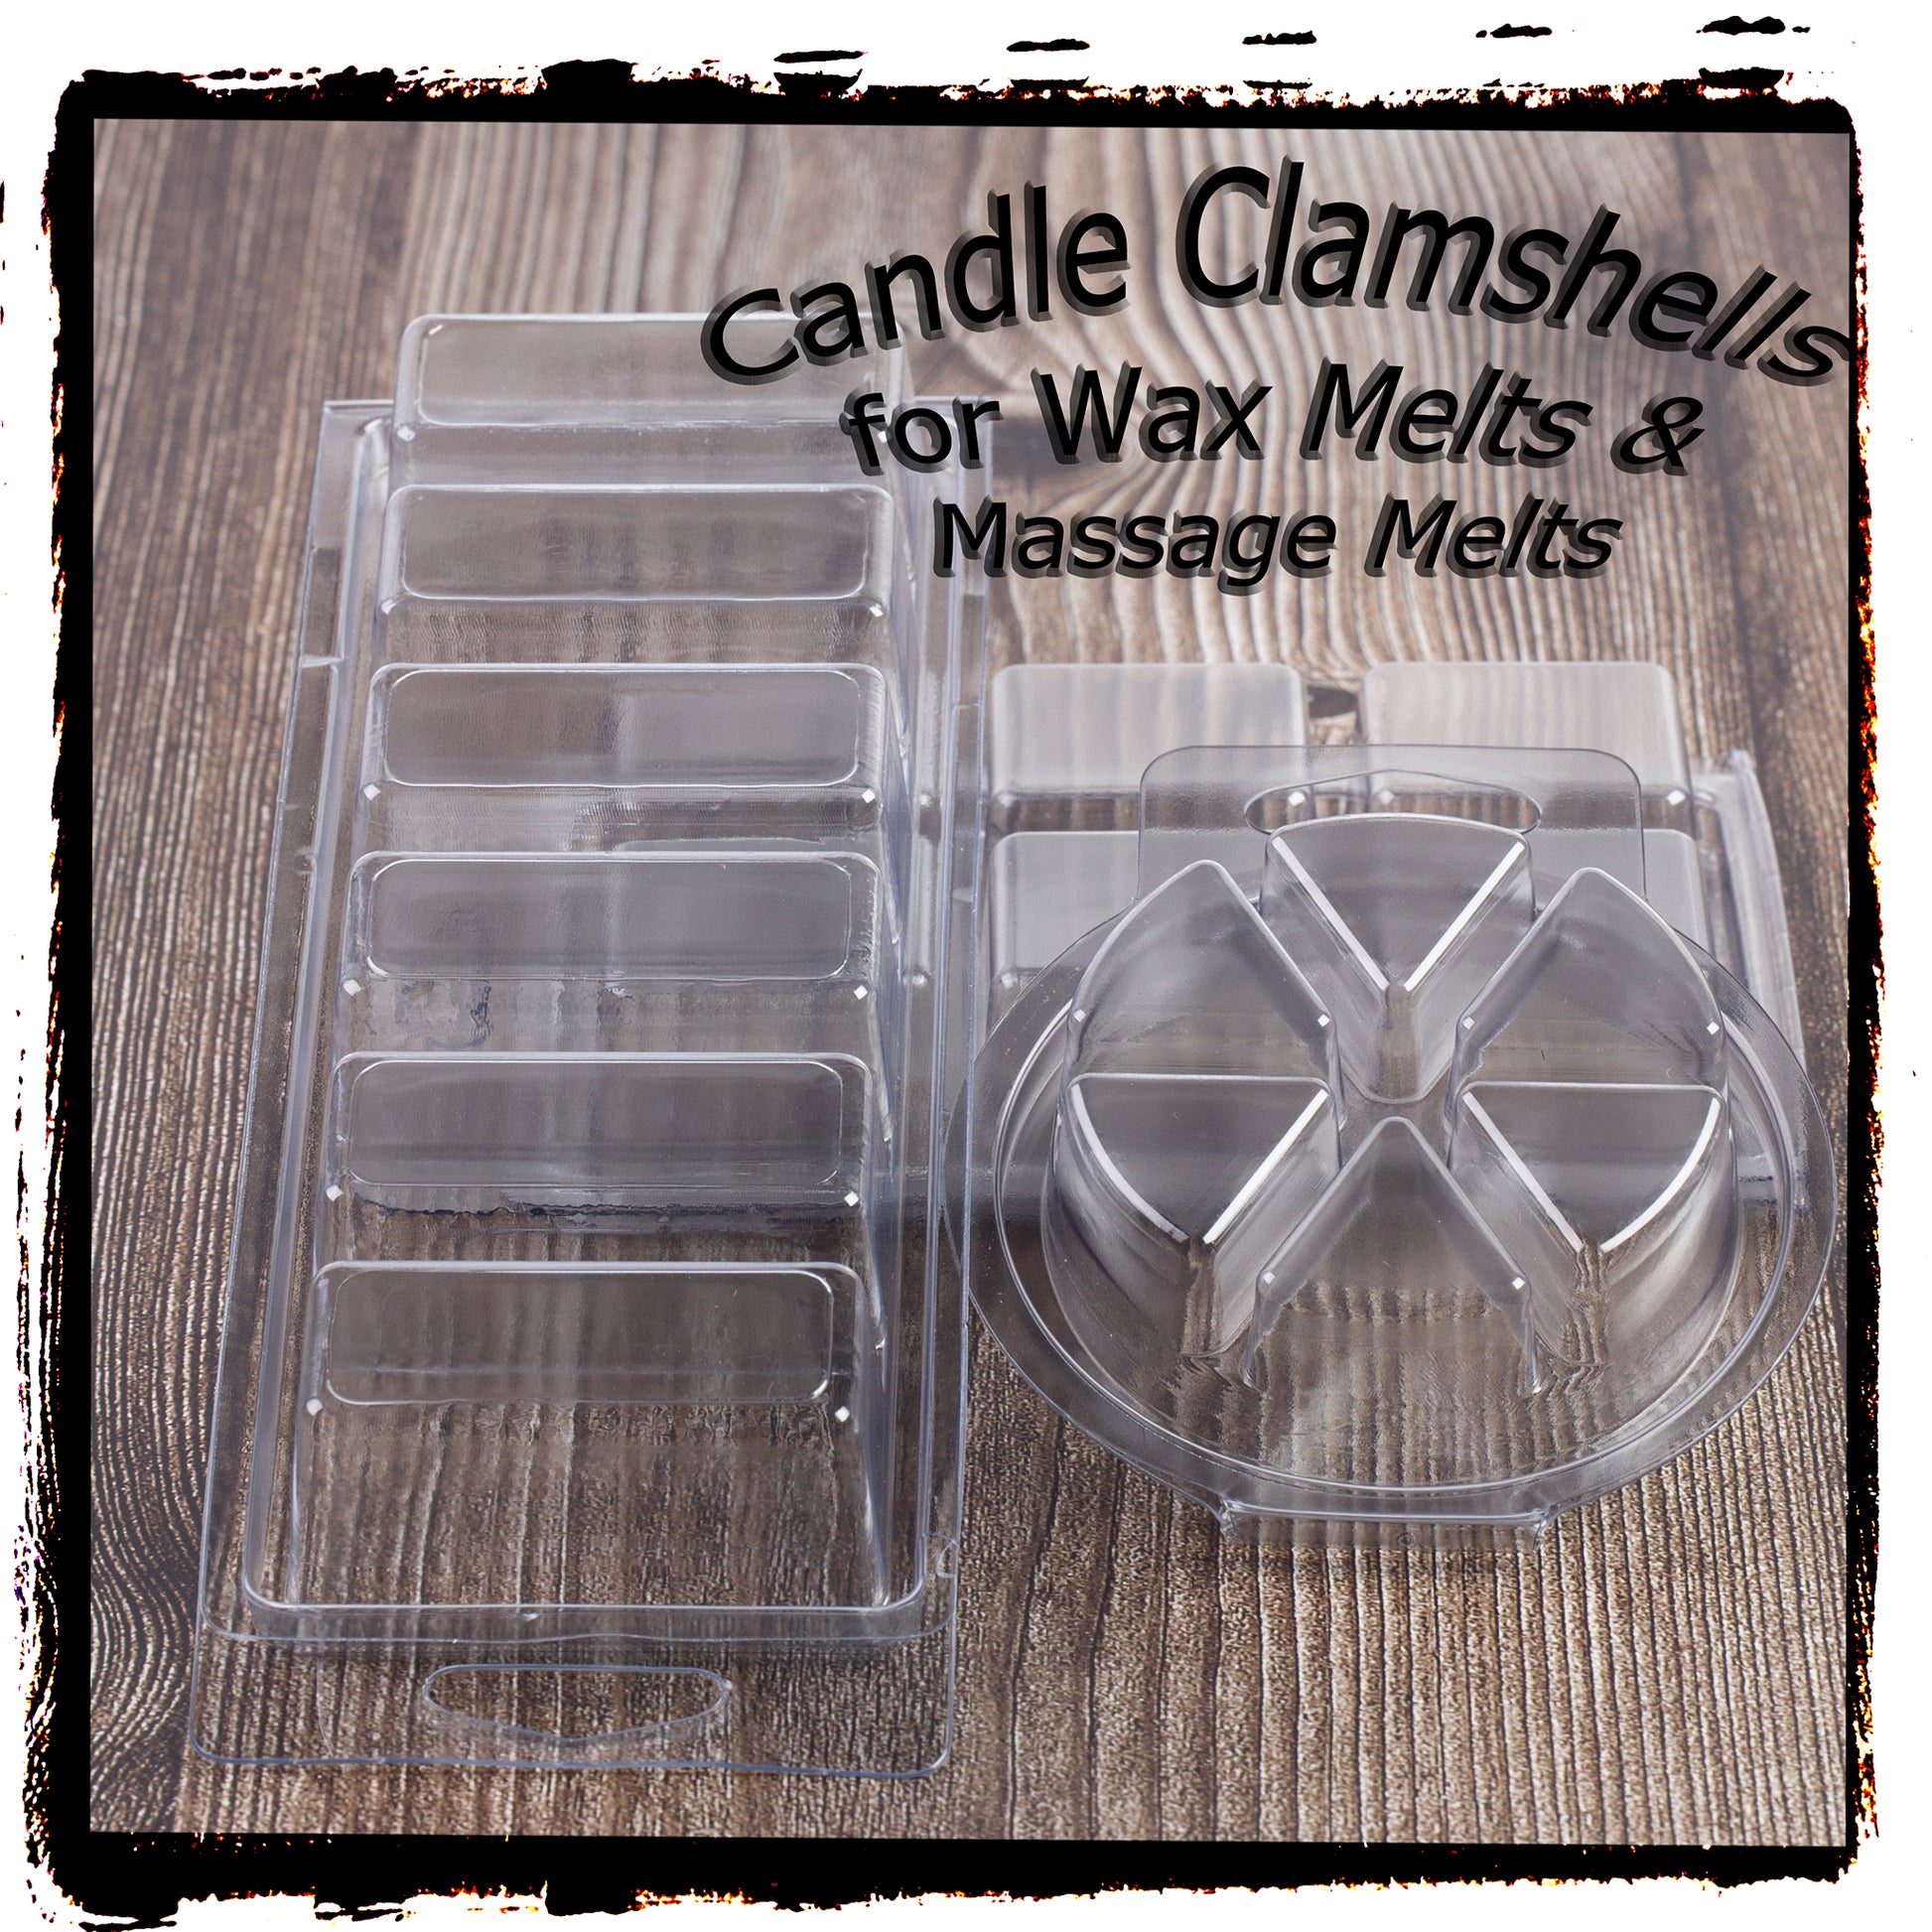 ElRoma 50 Pack Wax Melt Containers Clamshells for Wax Melts The 10